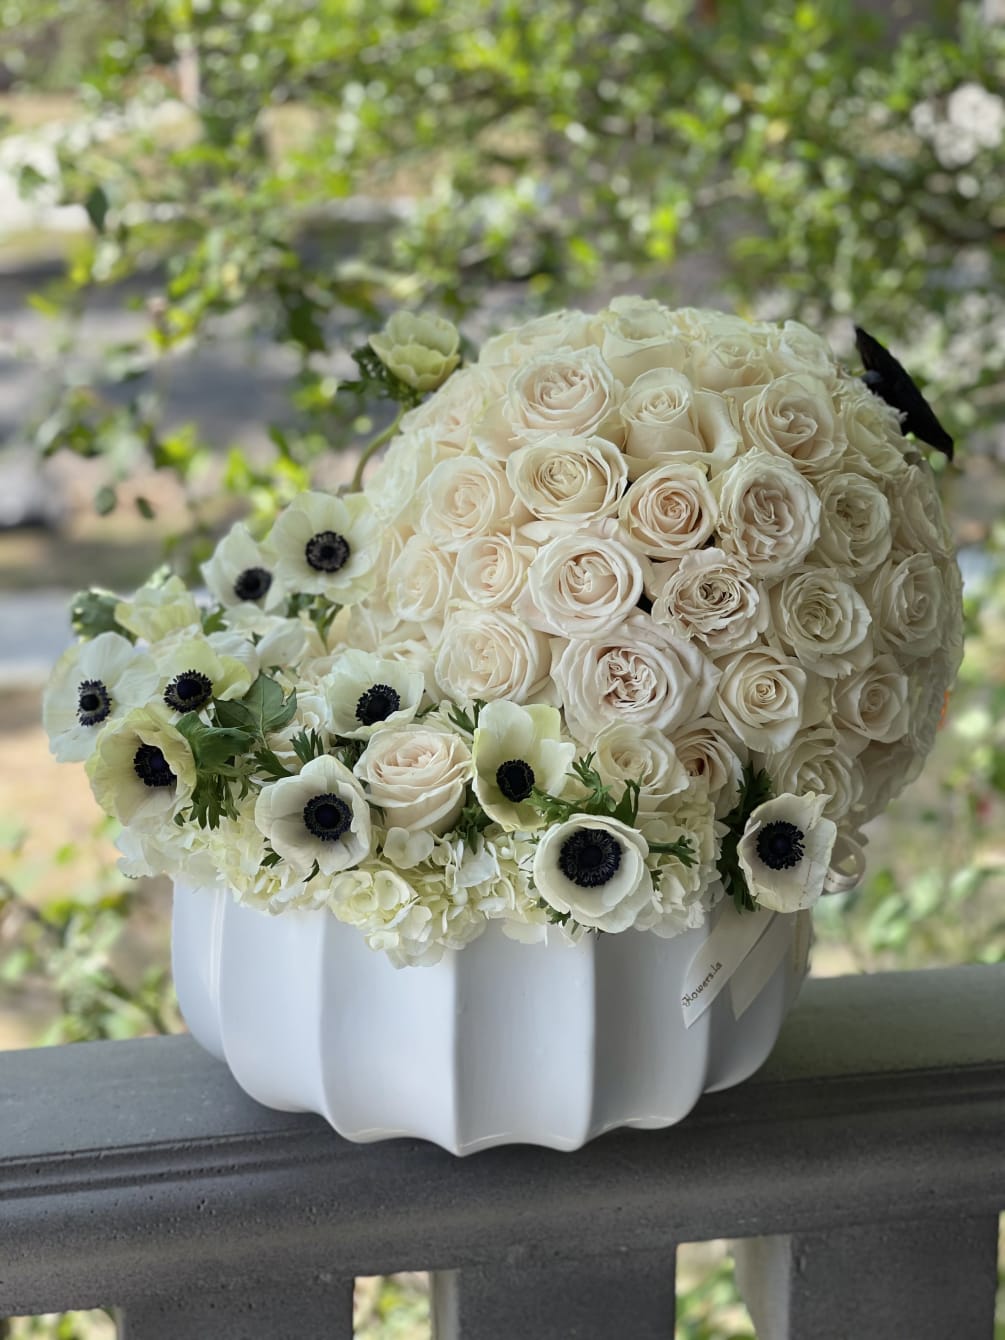 White rose ball surrounded with beautiful anemones. Unique and elegant arrangement for